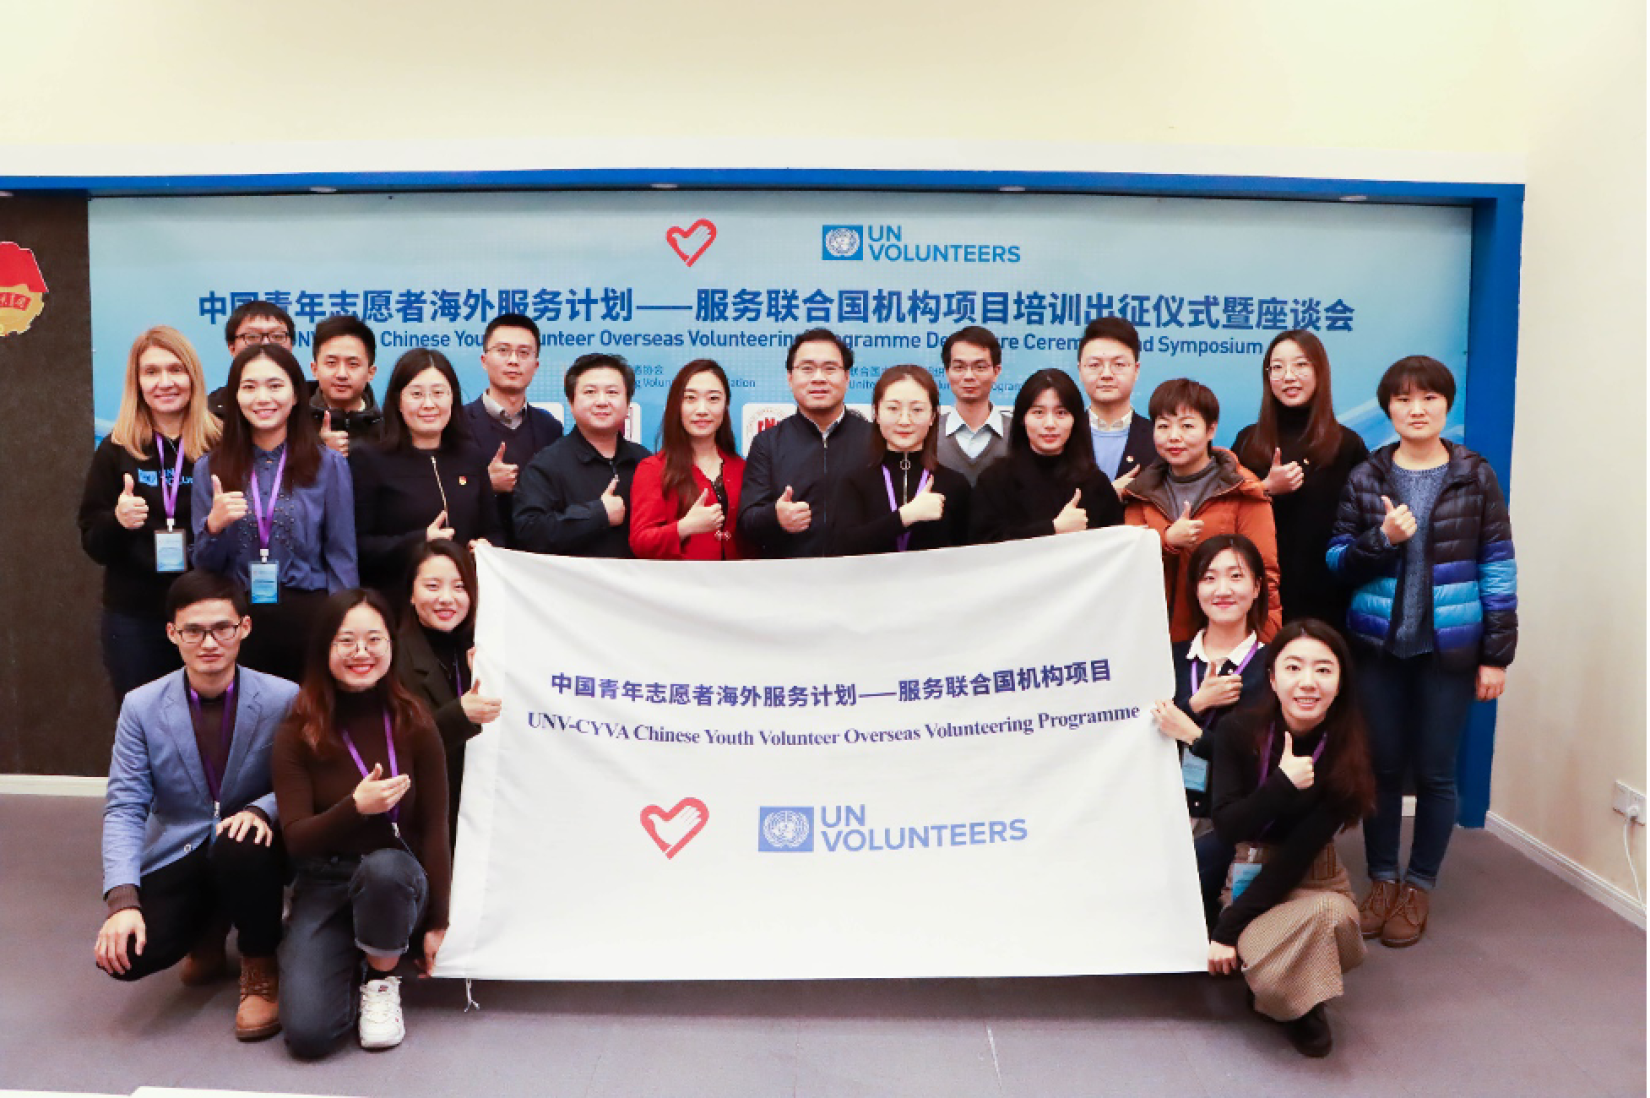 Ms. Zhang participated in the UNV-CYVA Chinese Youth Overseas Volunteering Programme